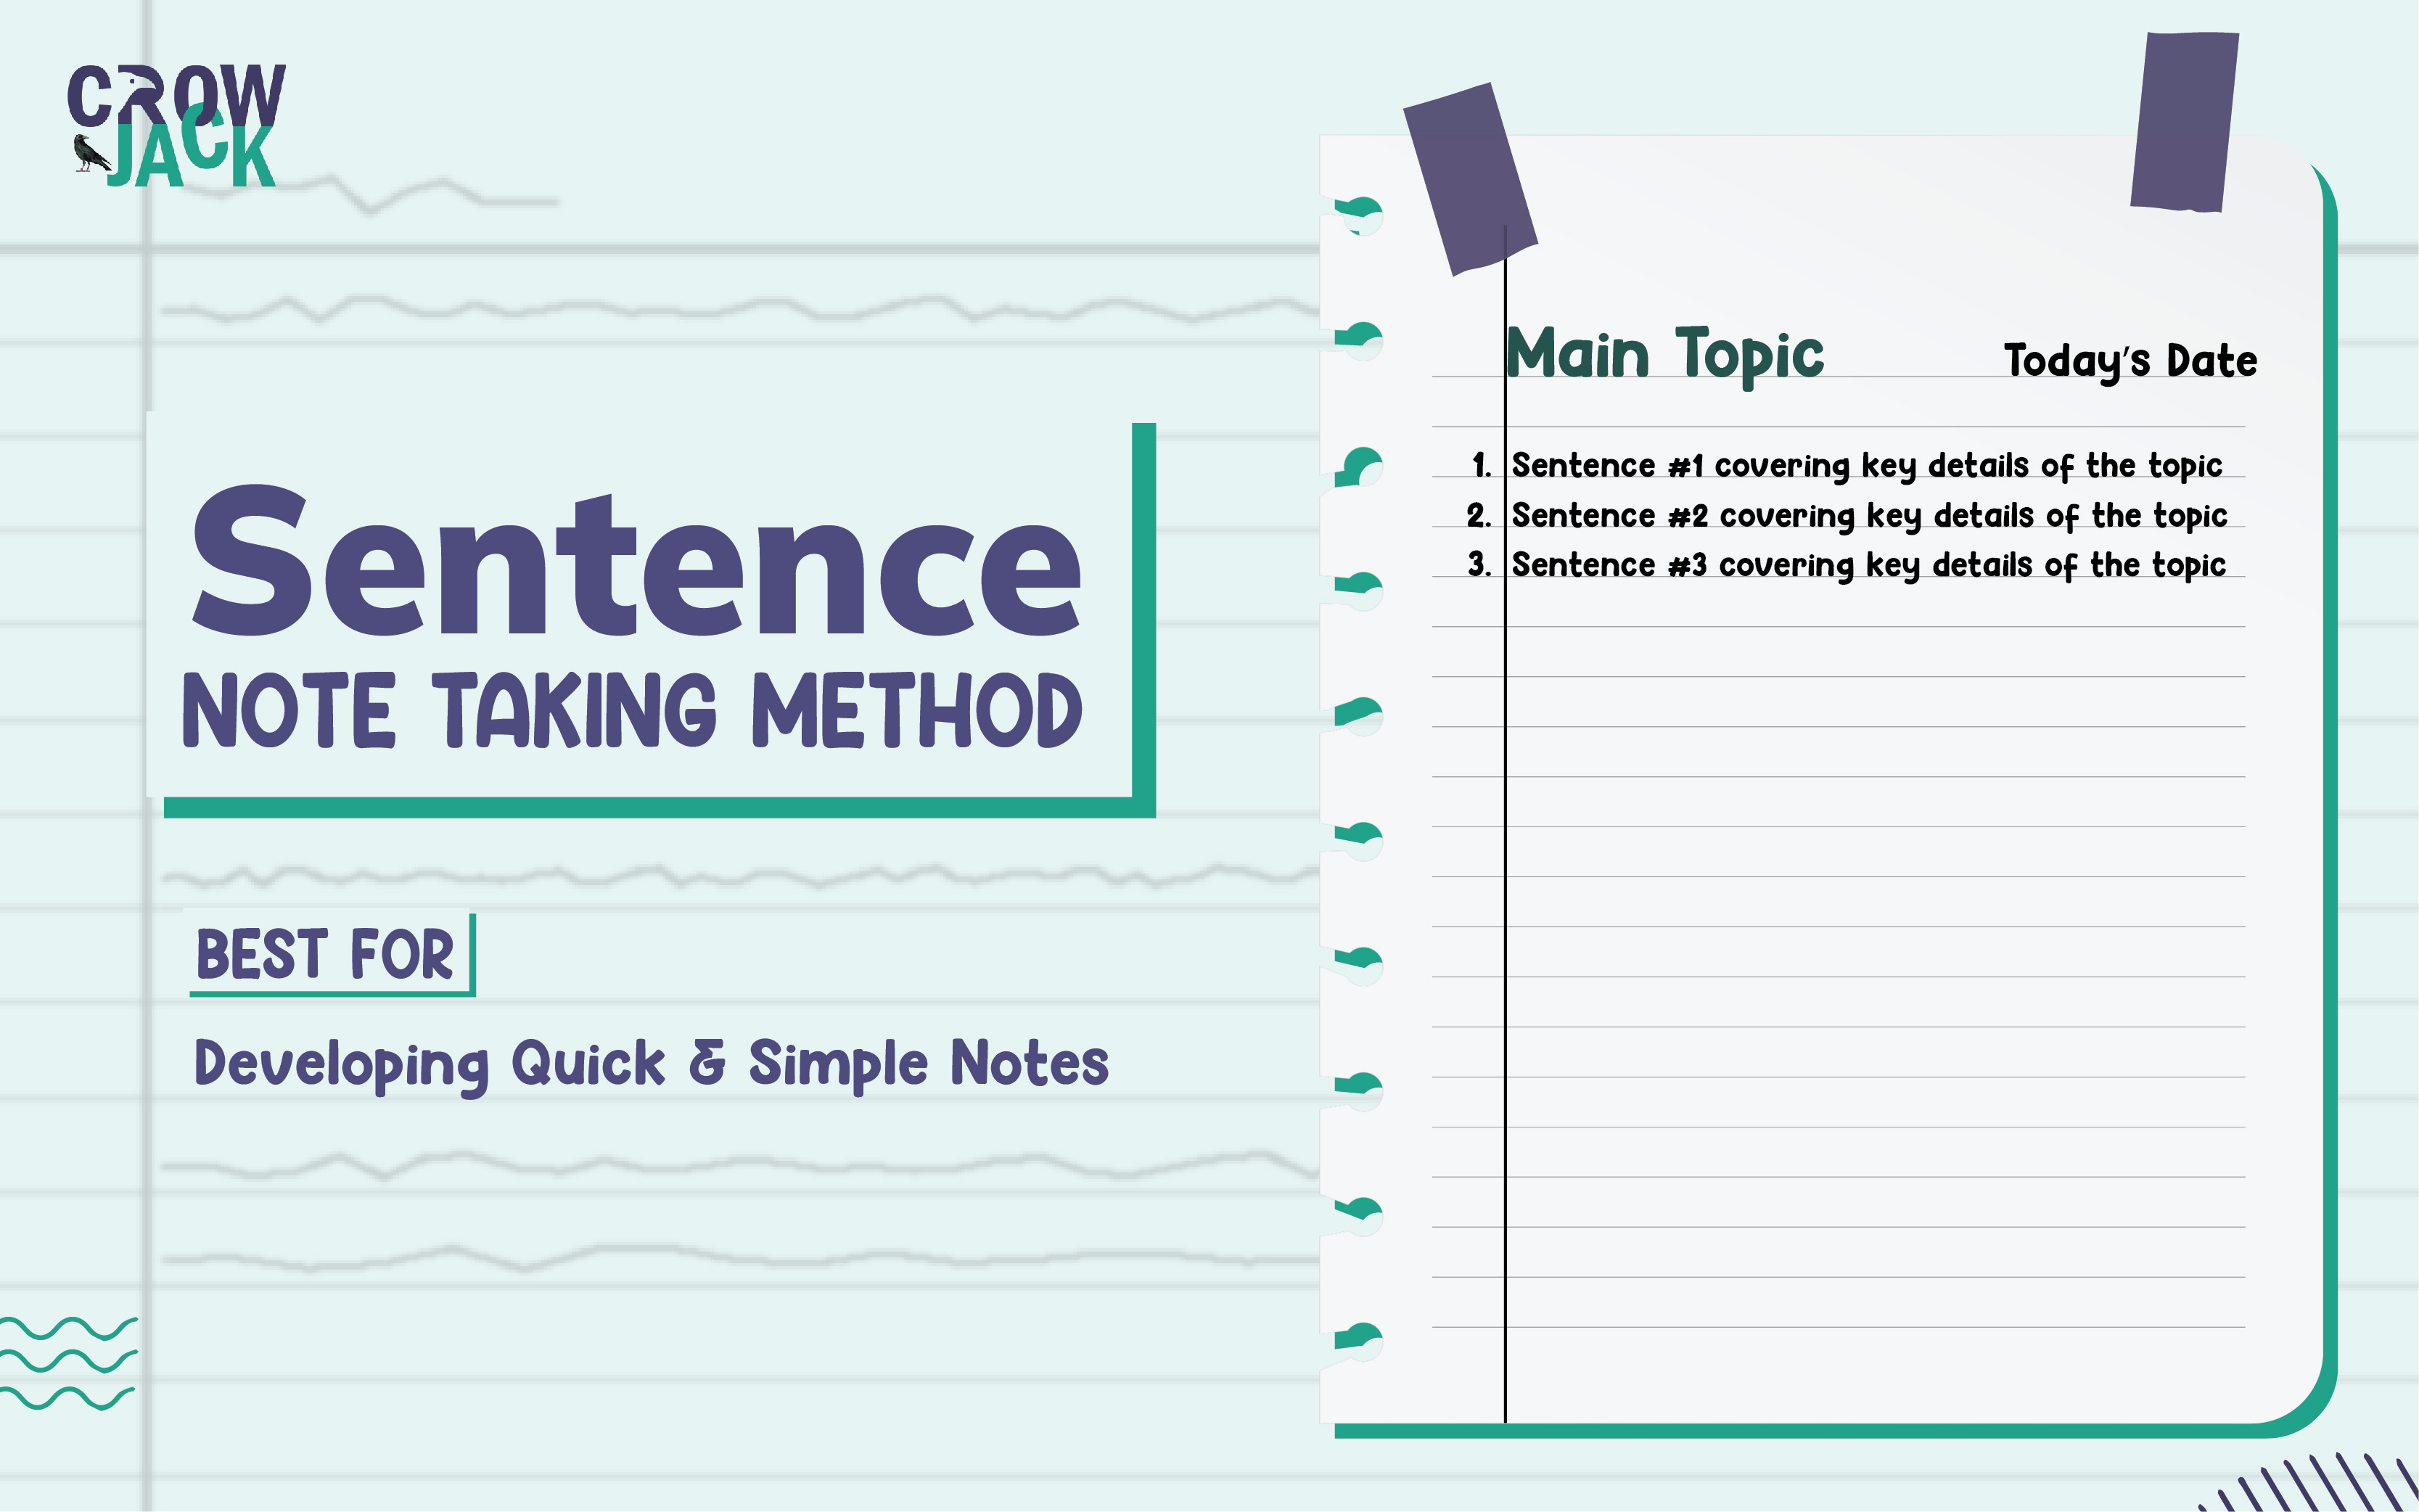 When to use the sentence method for note taking